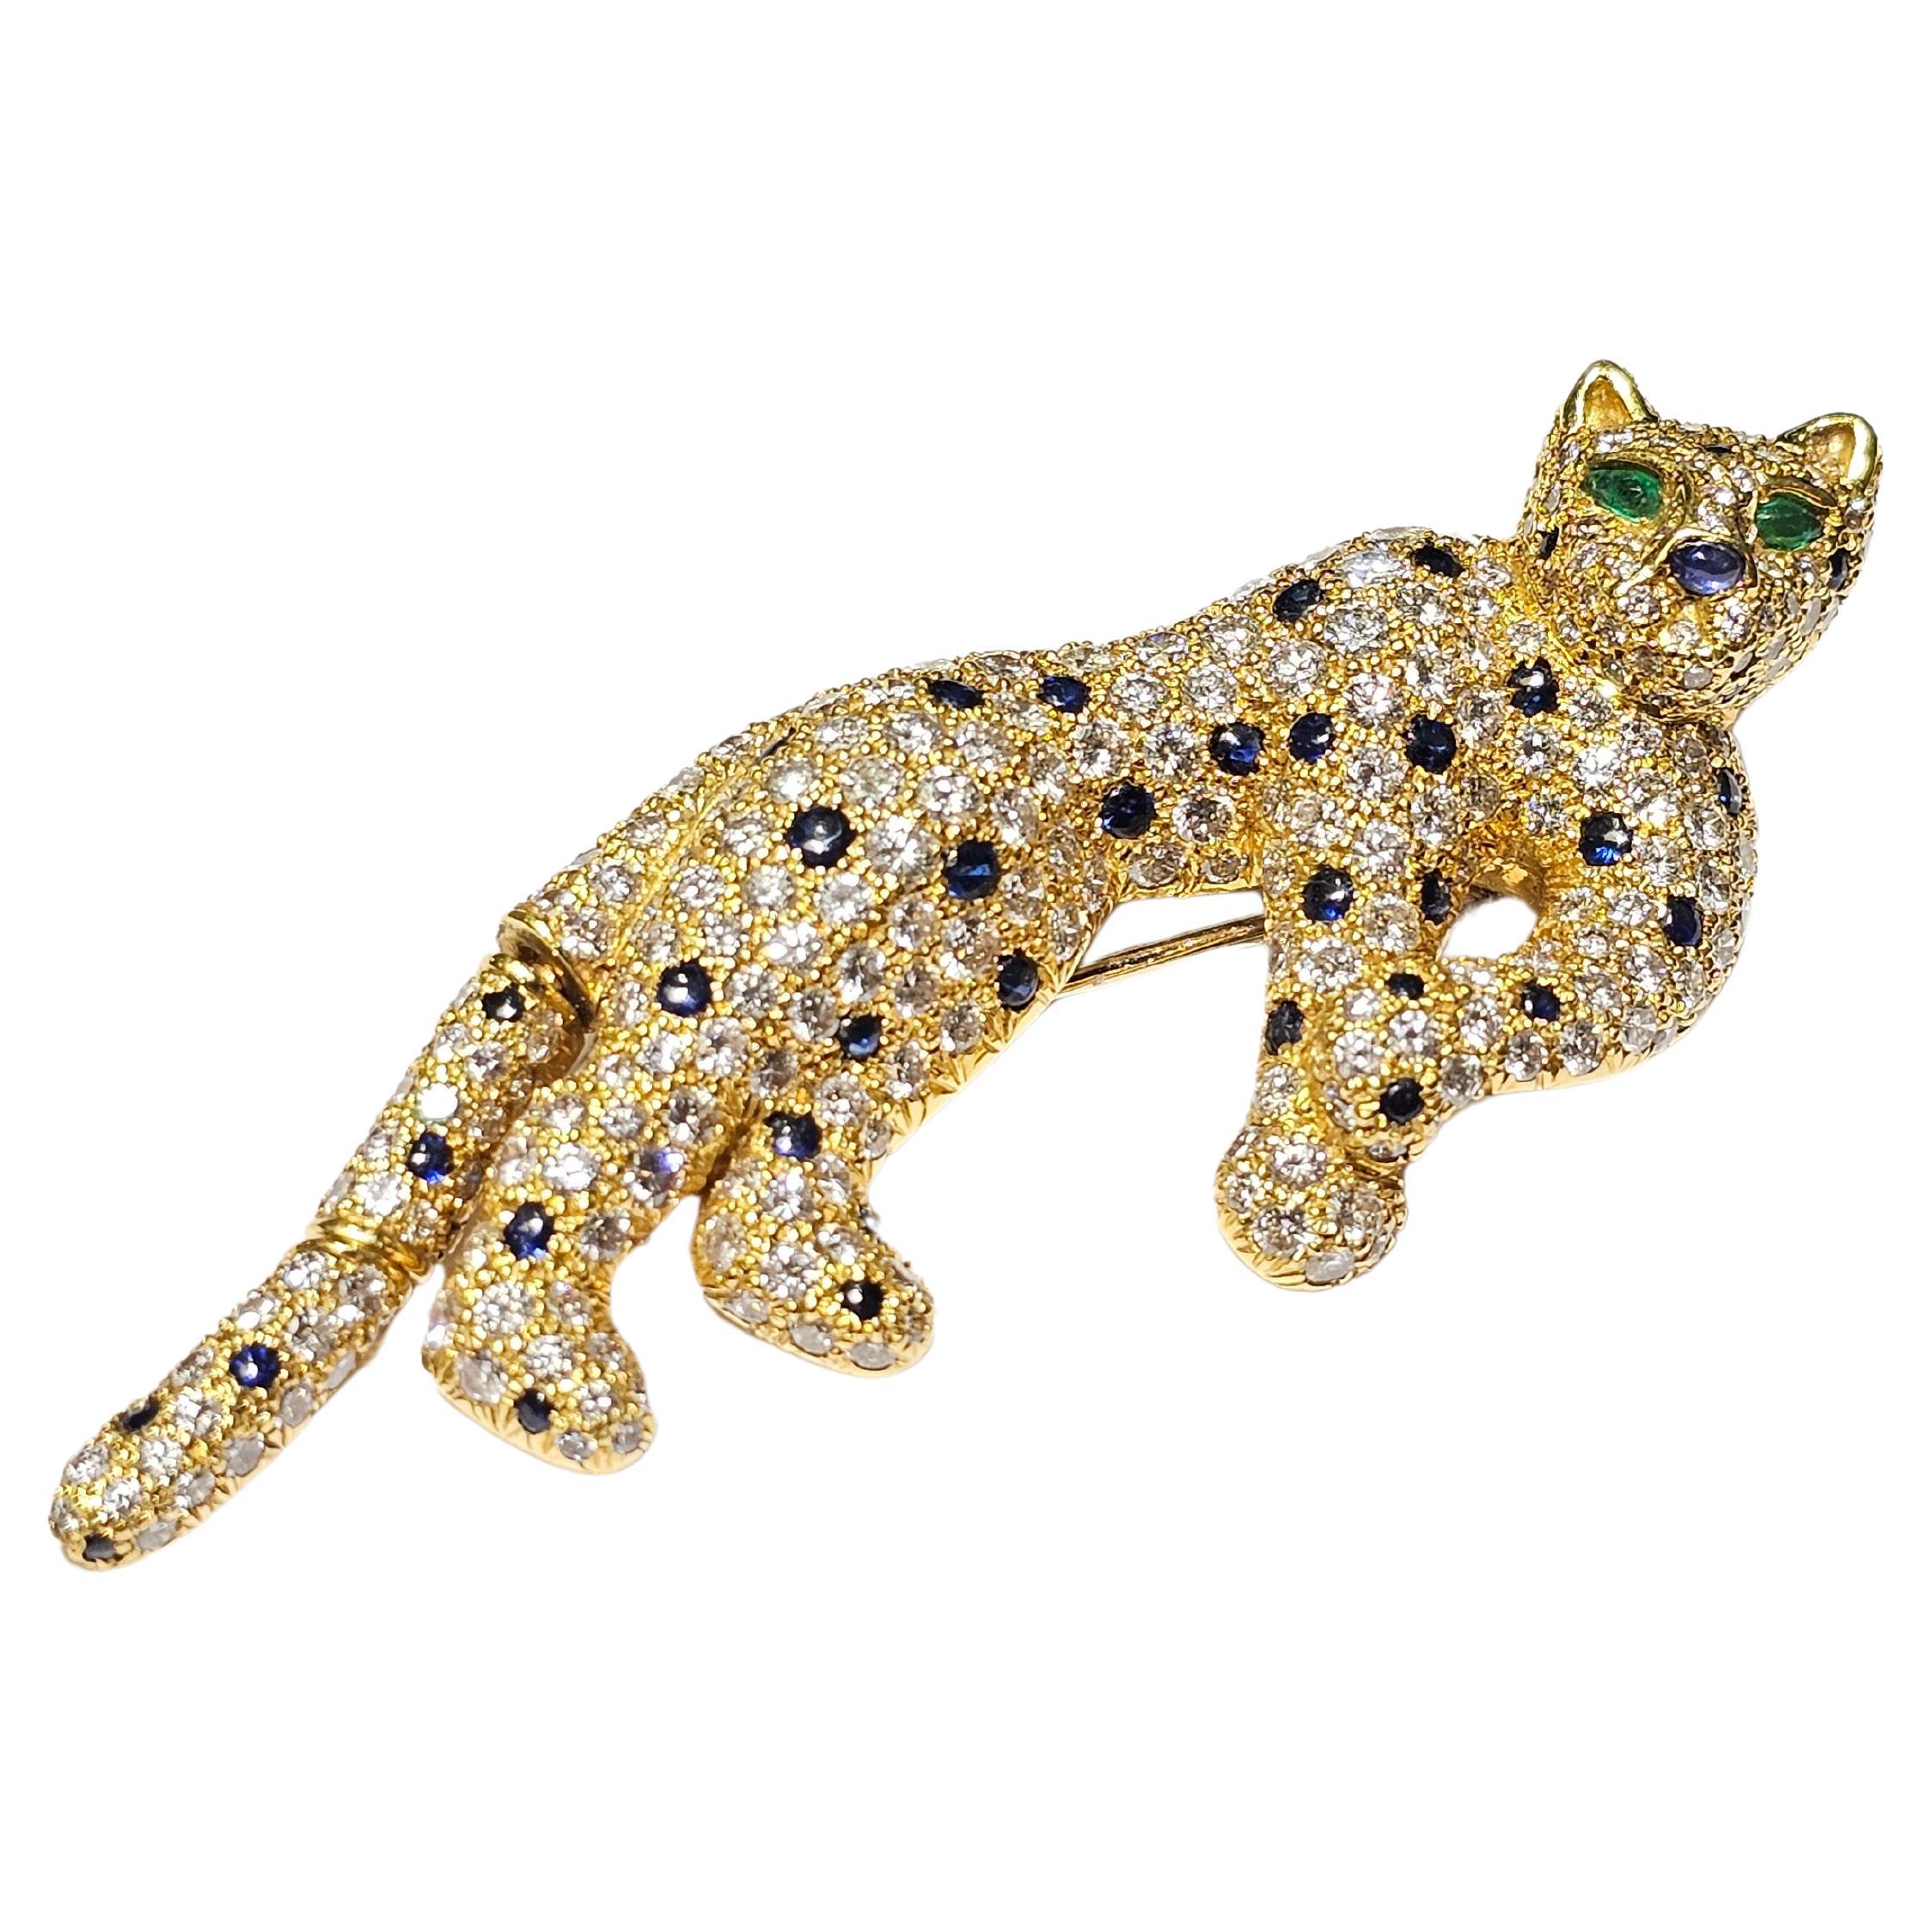 Diamond & Sapphire Cat Brooch

An 18-karat yellow gold cat motif brooch featuring an articulated tail. Set with round cut diamonds, cabochon sapphires, and cabochon emerald eyes.

Stamped 750

Measurements: 2.75